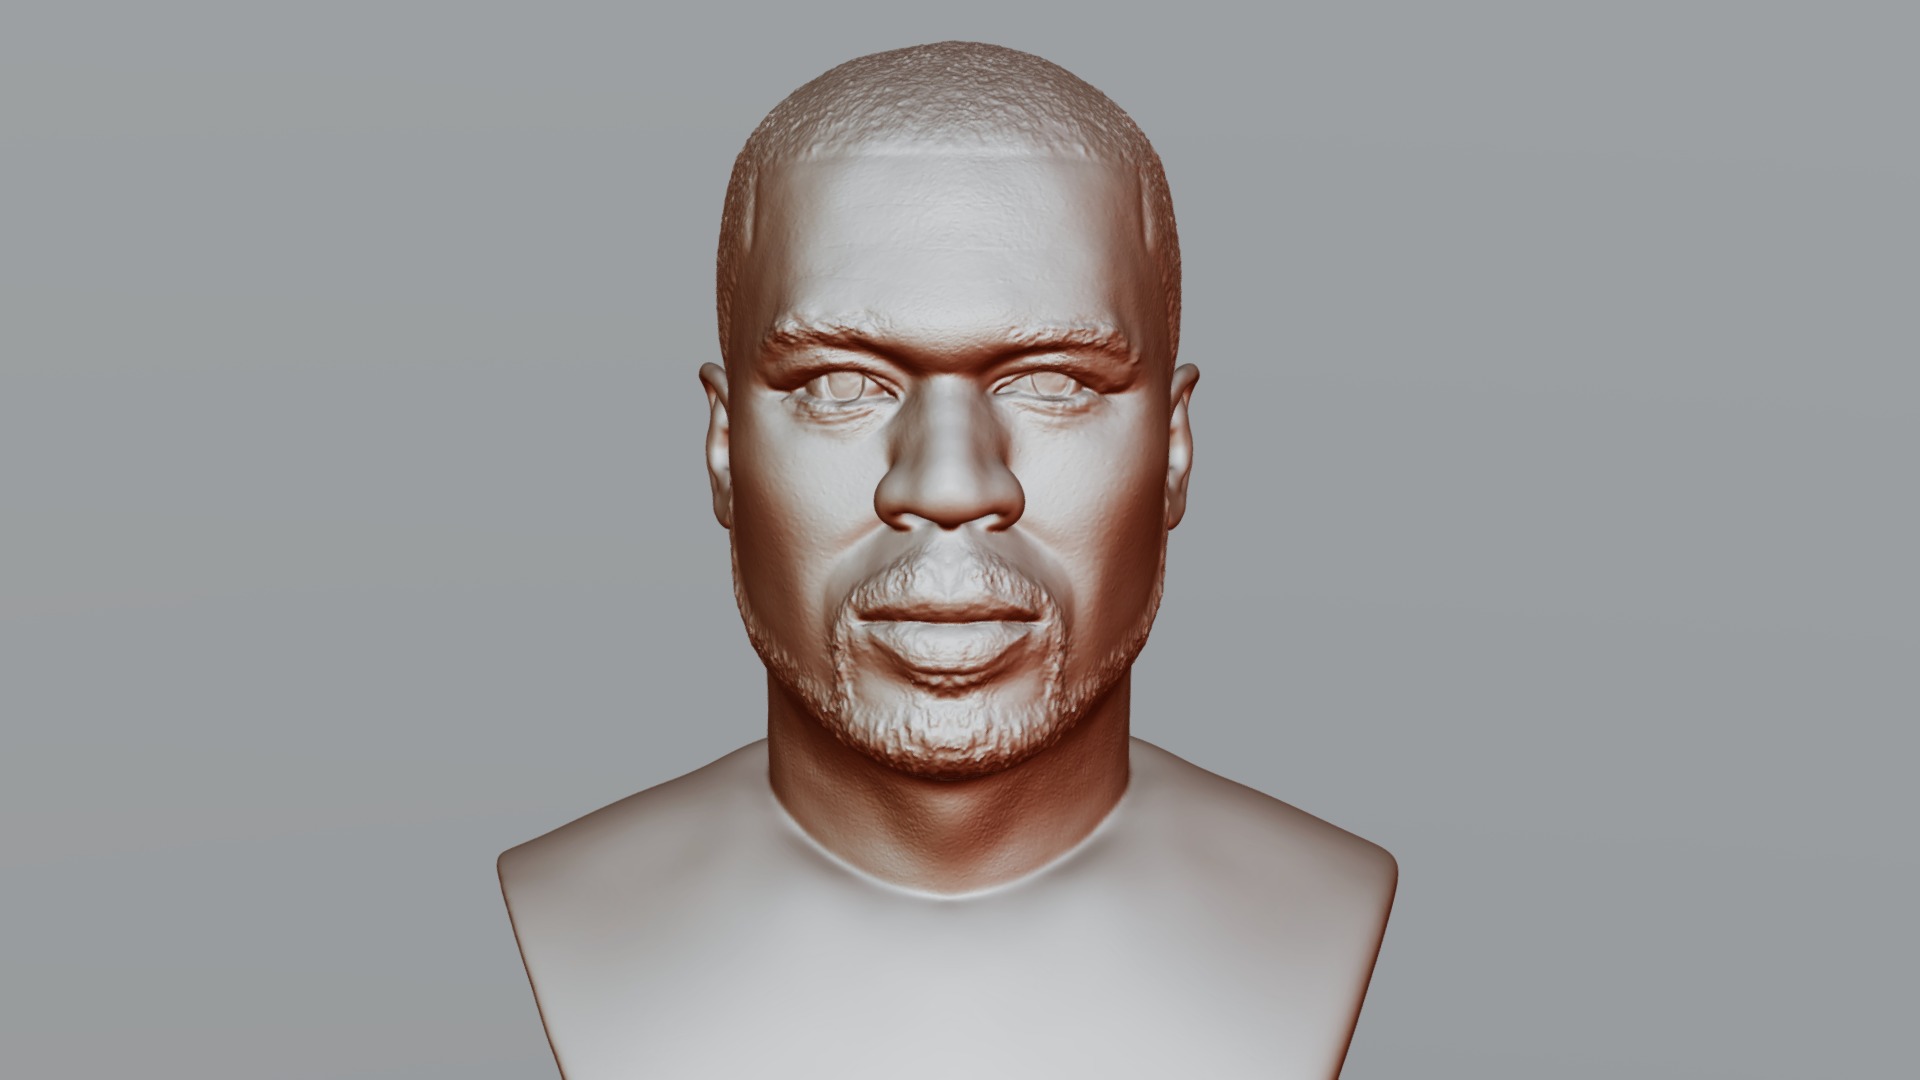 3D model 50 Cent bust for 3D printing - This is a 3D model of the 50 Cent bust for 3D printing. The 3D model is about a man with a white shirt.